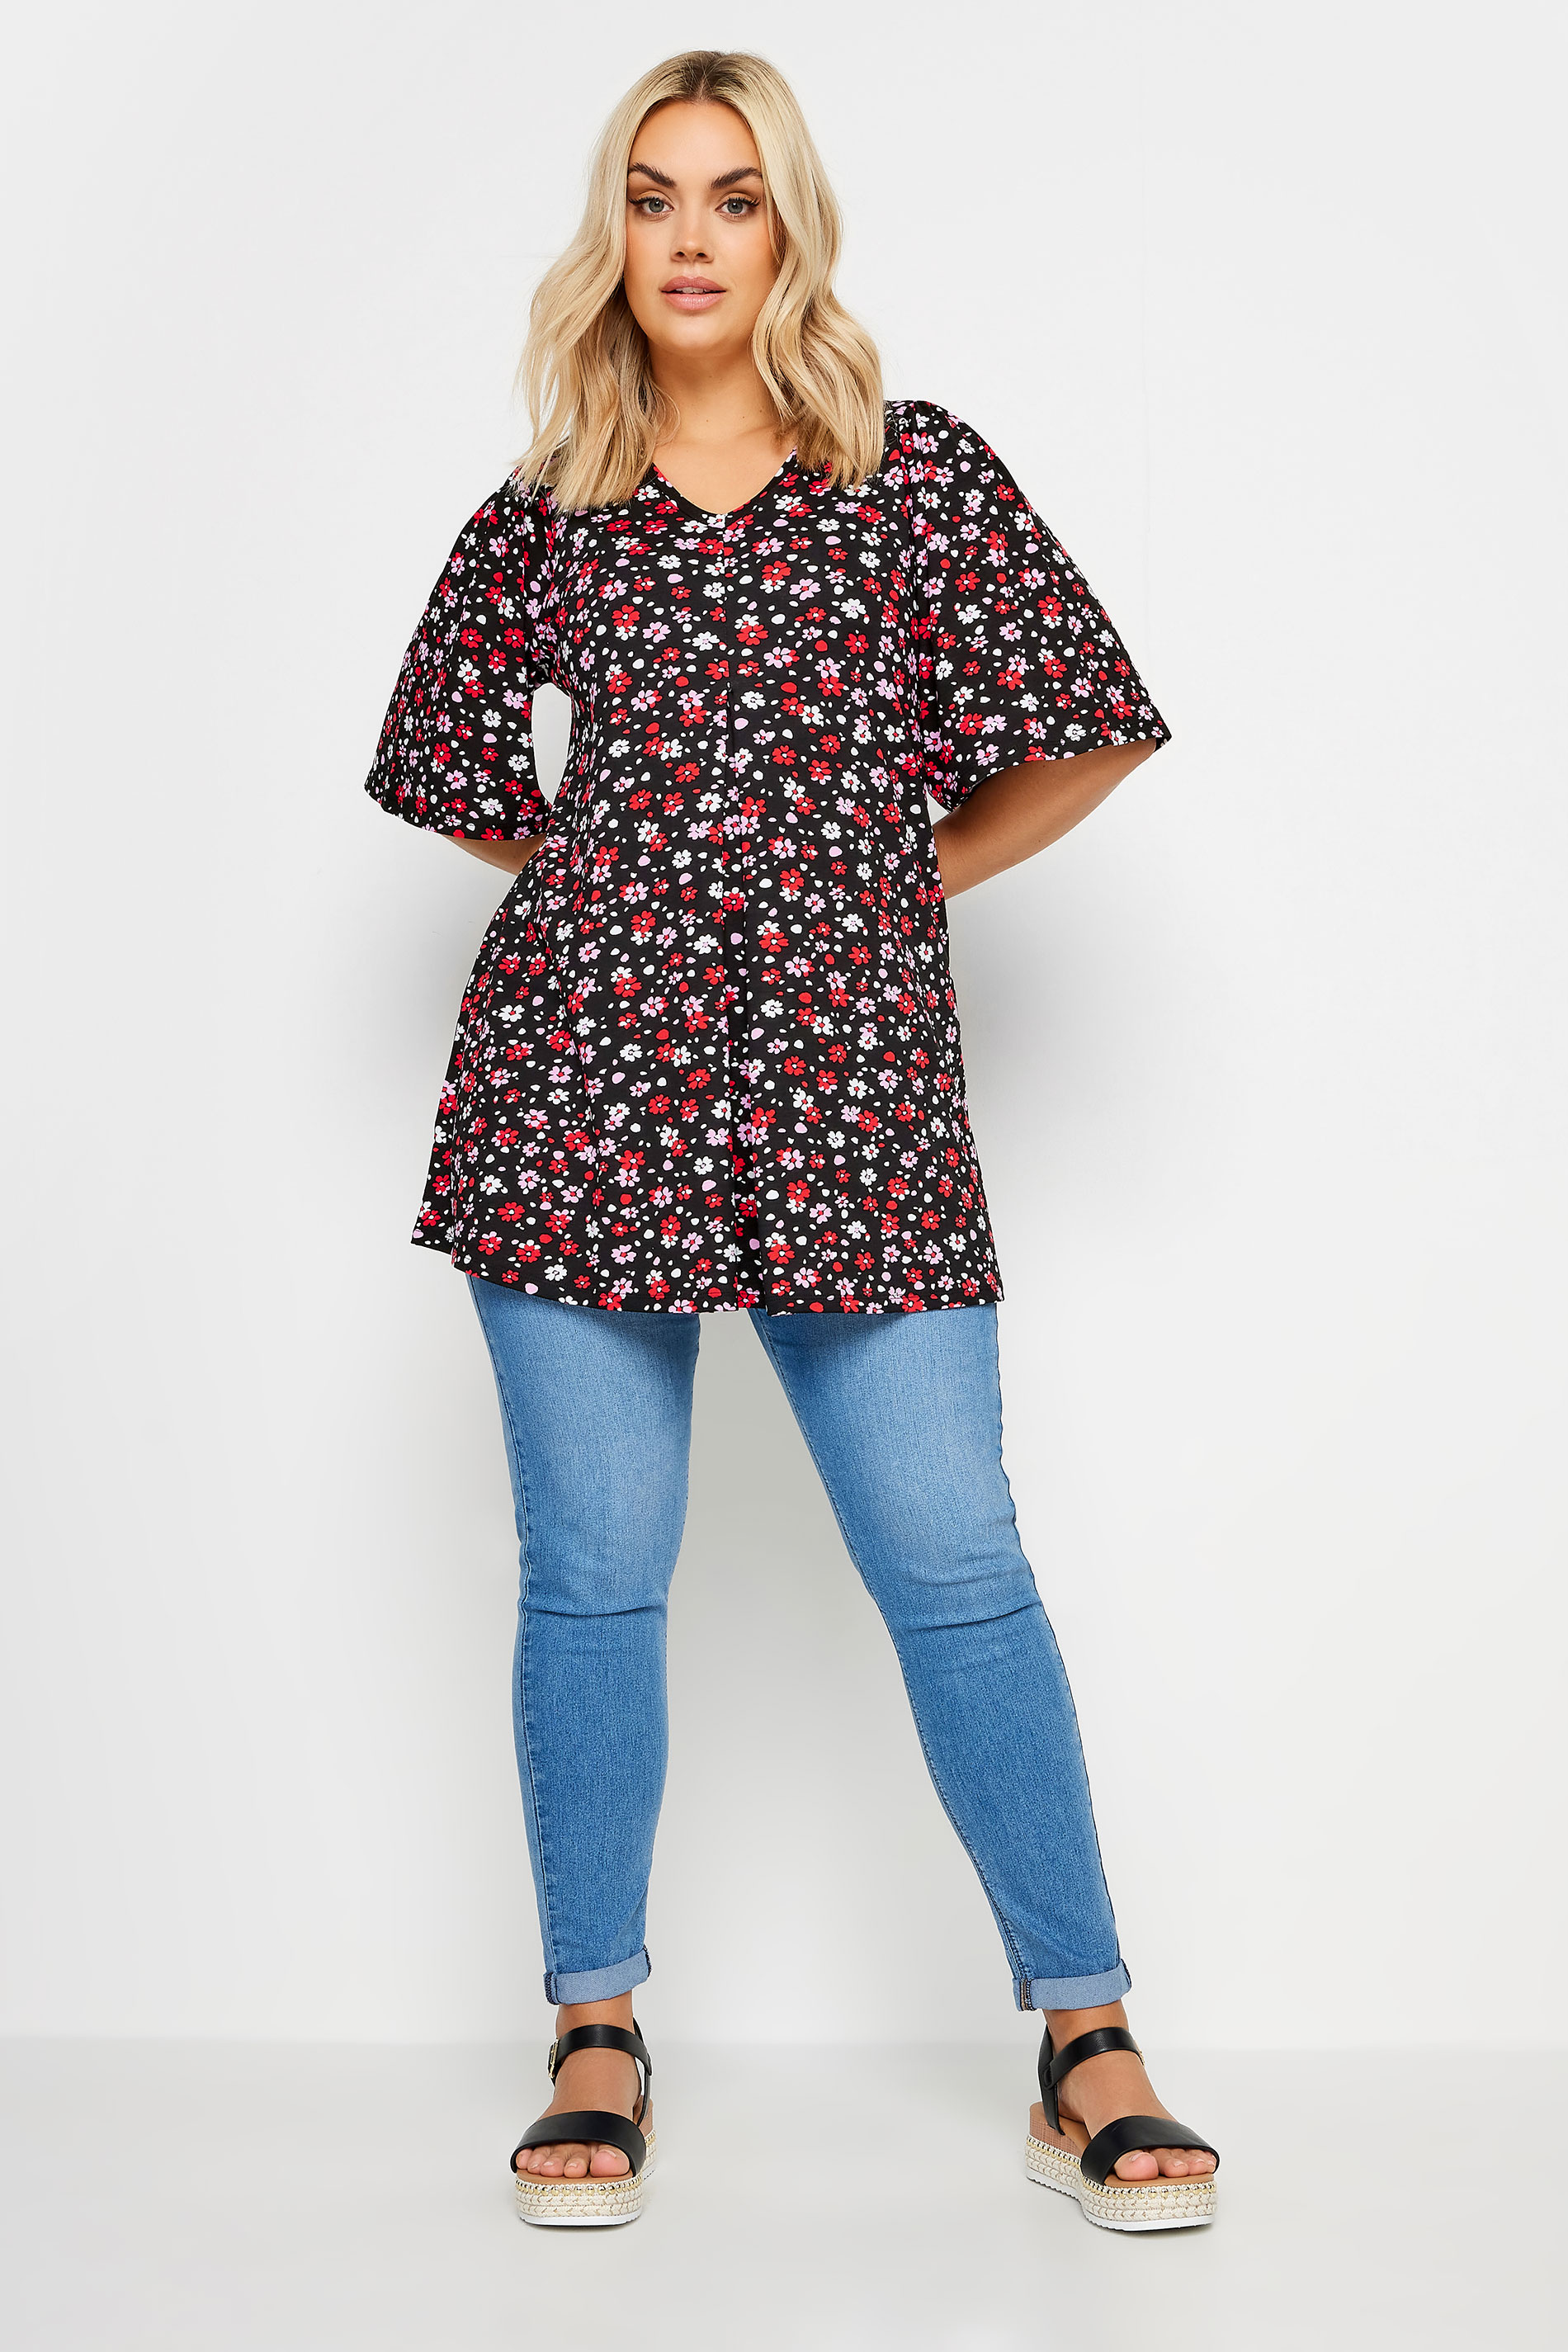 YOURS Plus Size Black Floral Pleated Swing Top | Yours Clothing  2